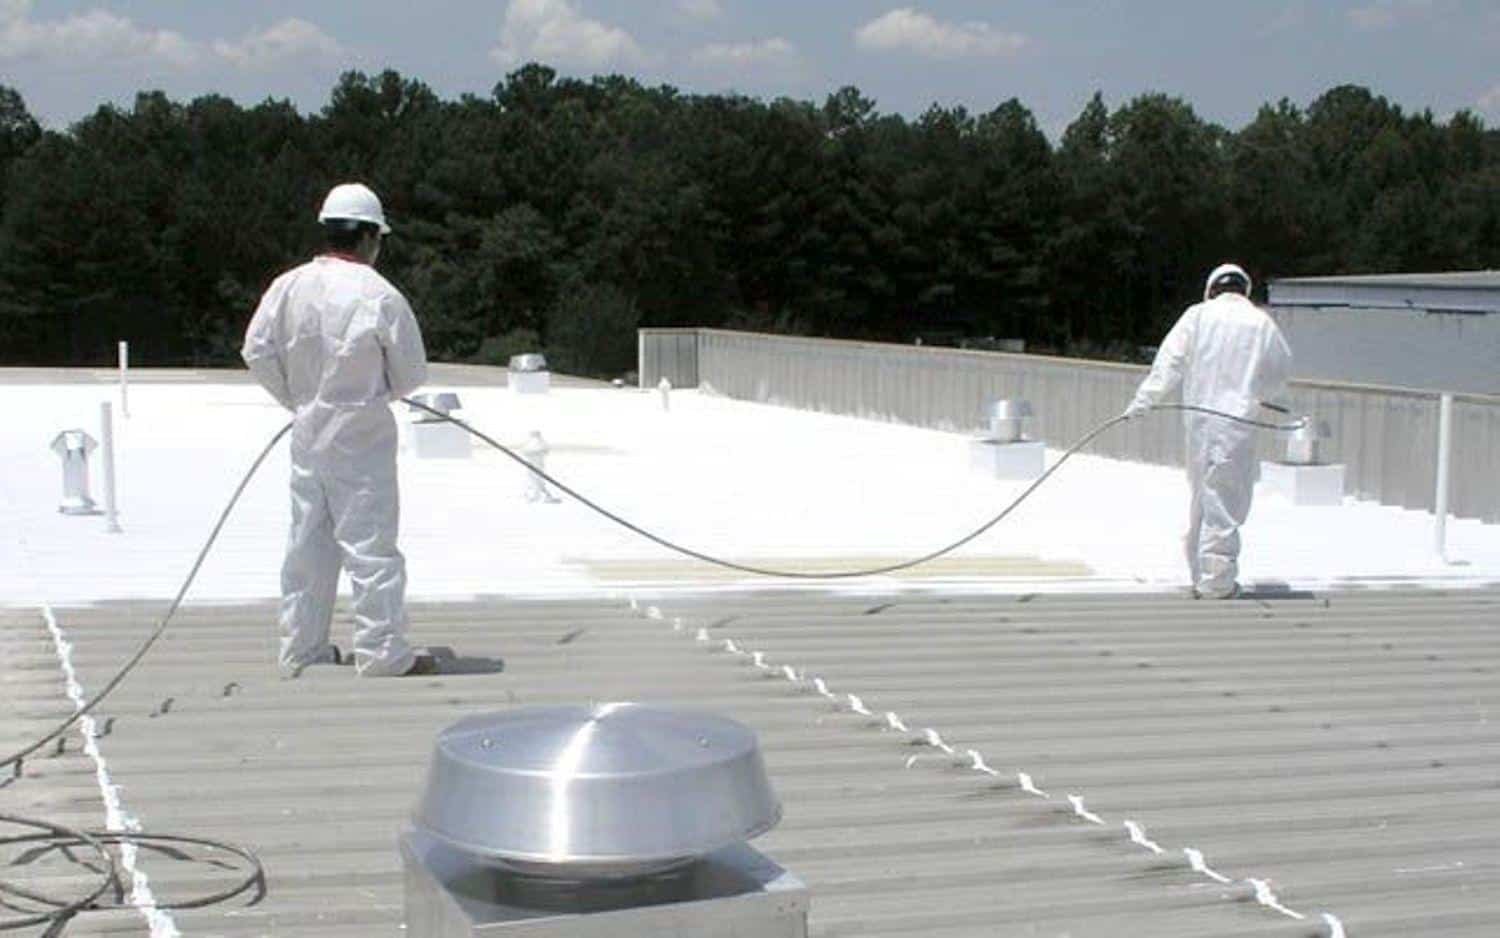 Waterproofing the commercial roofs